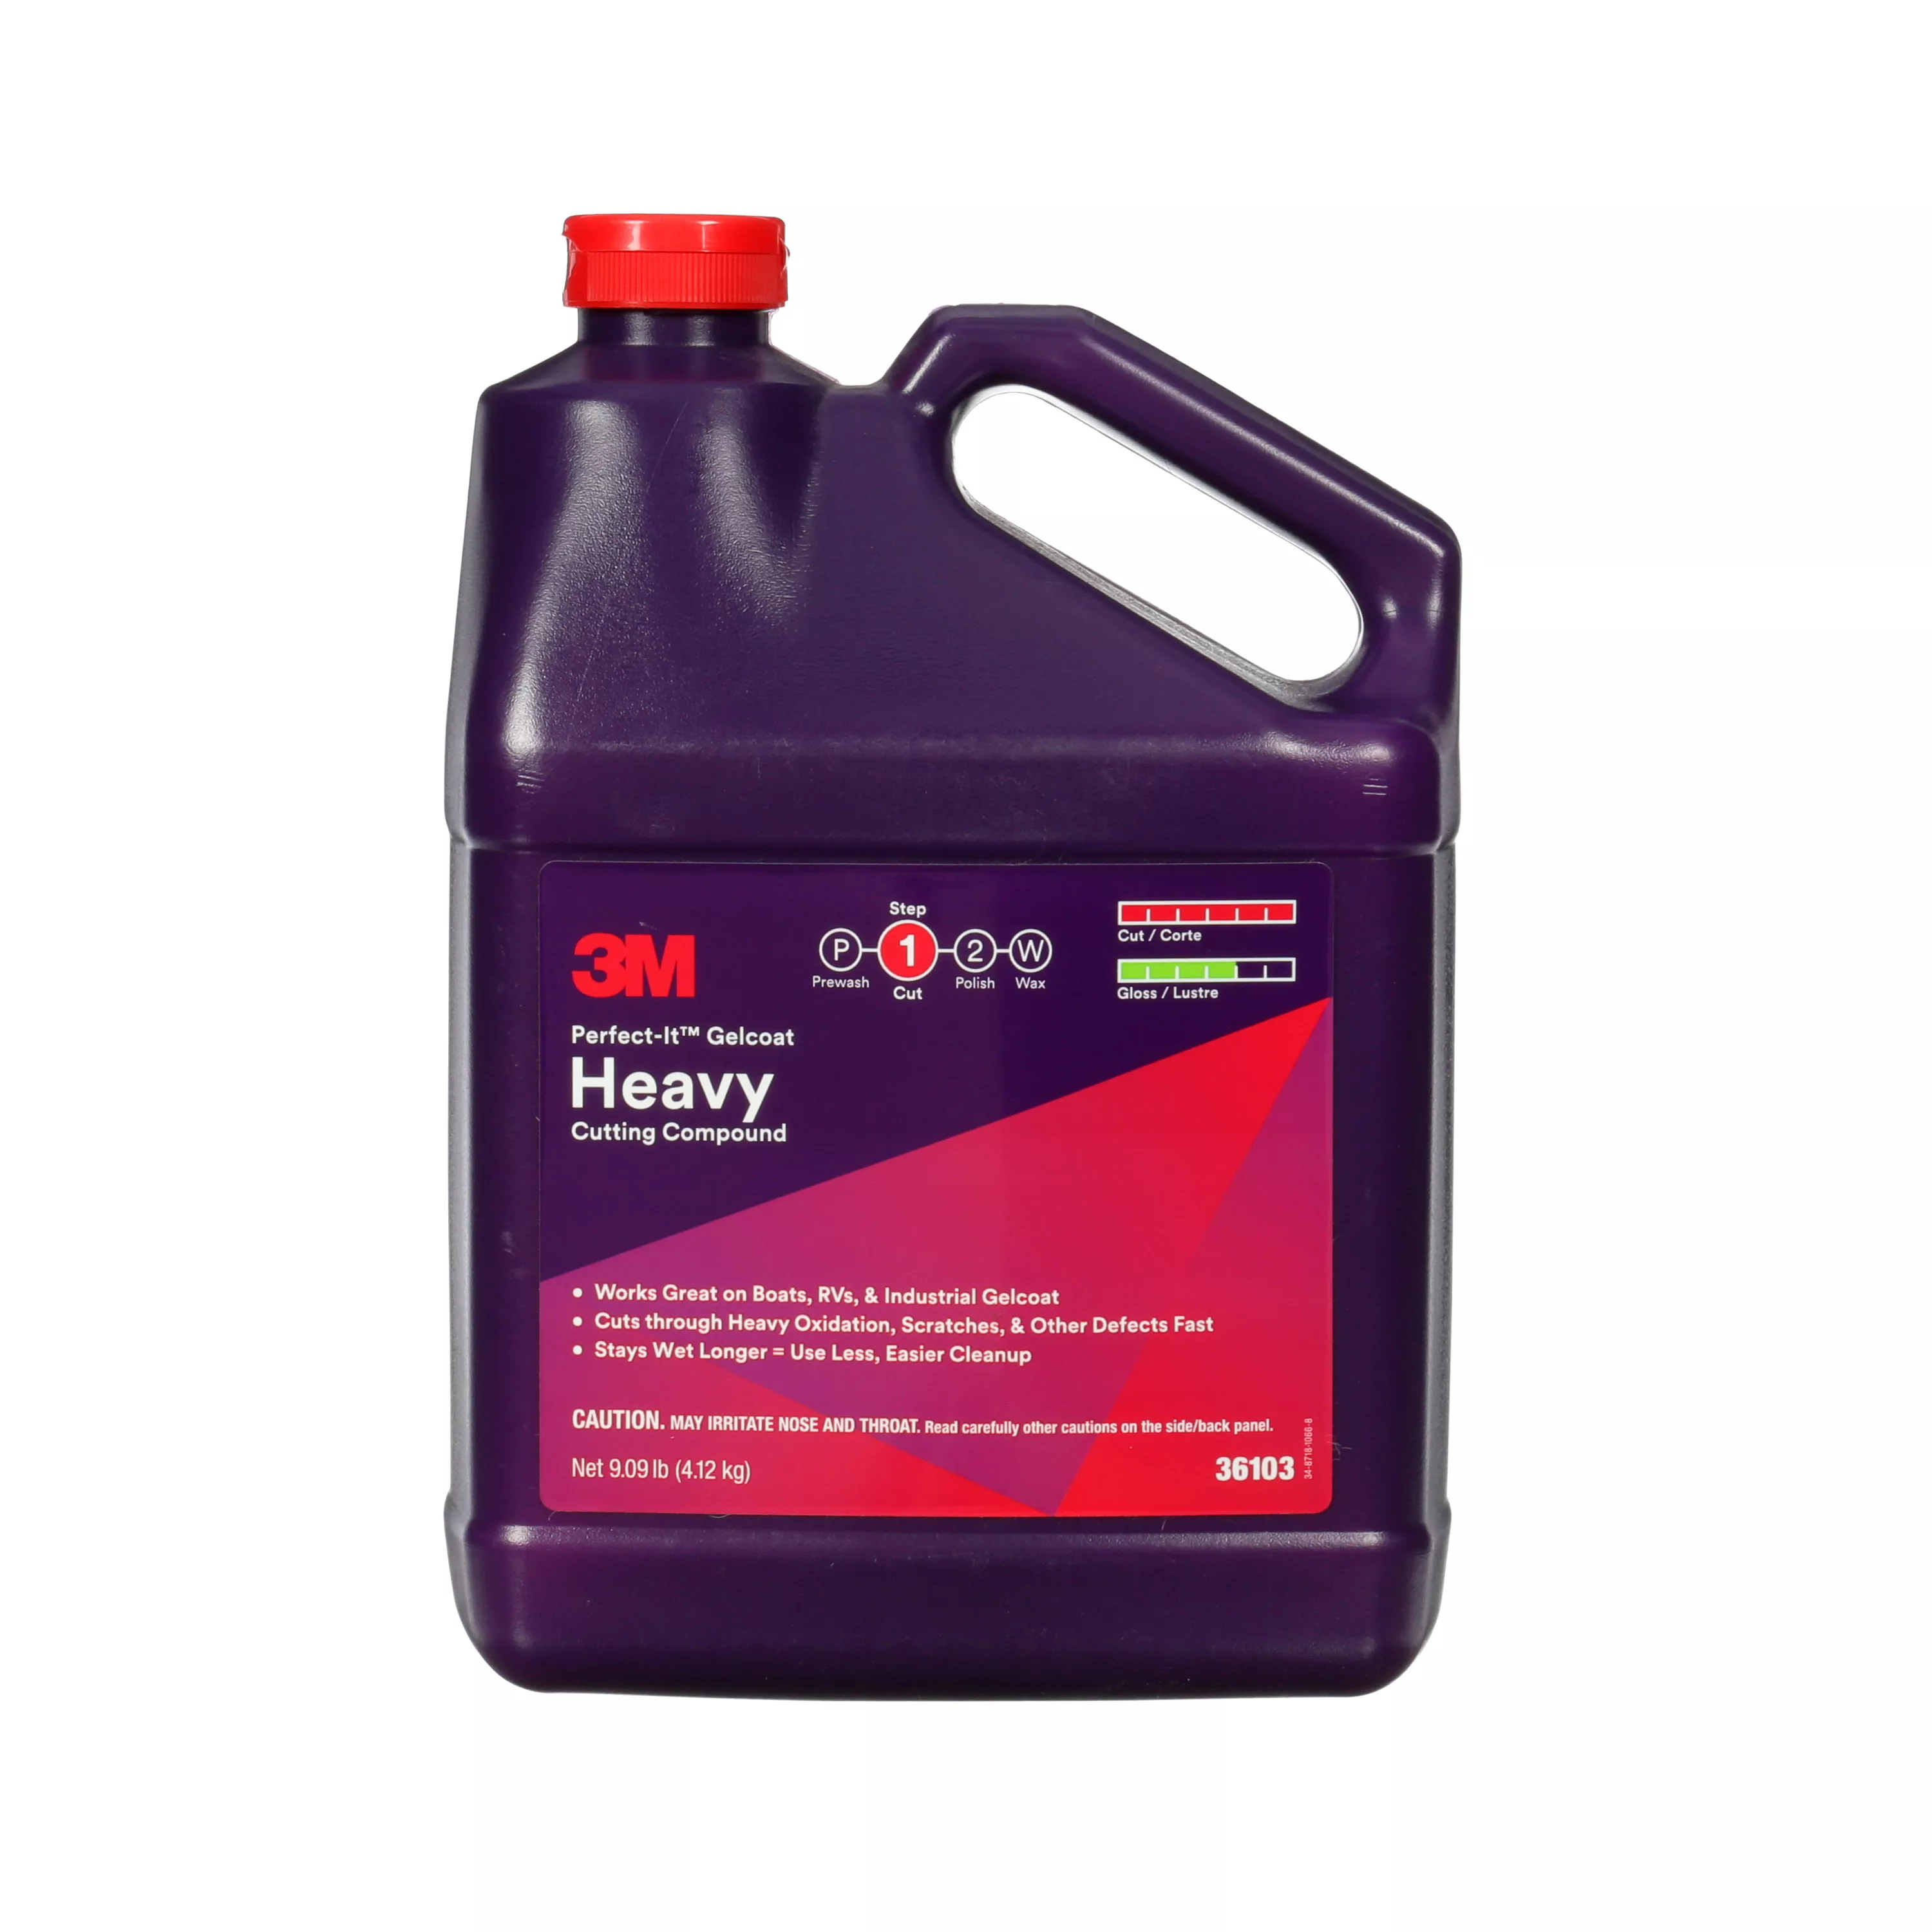 SKU 7100210896 | 3M™ Perfect-It™ Gelcoat Heavy Cutting Compound